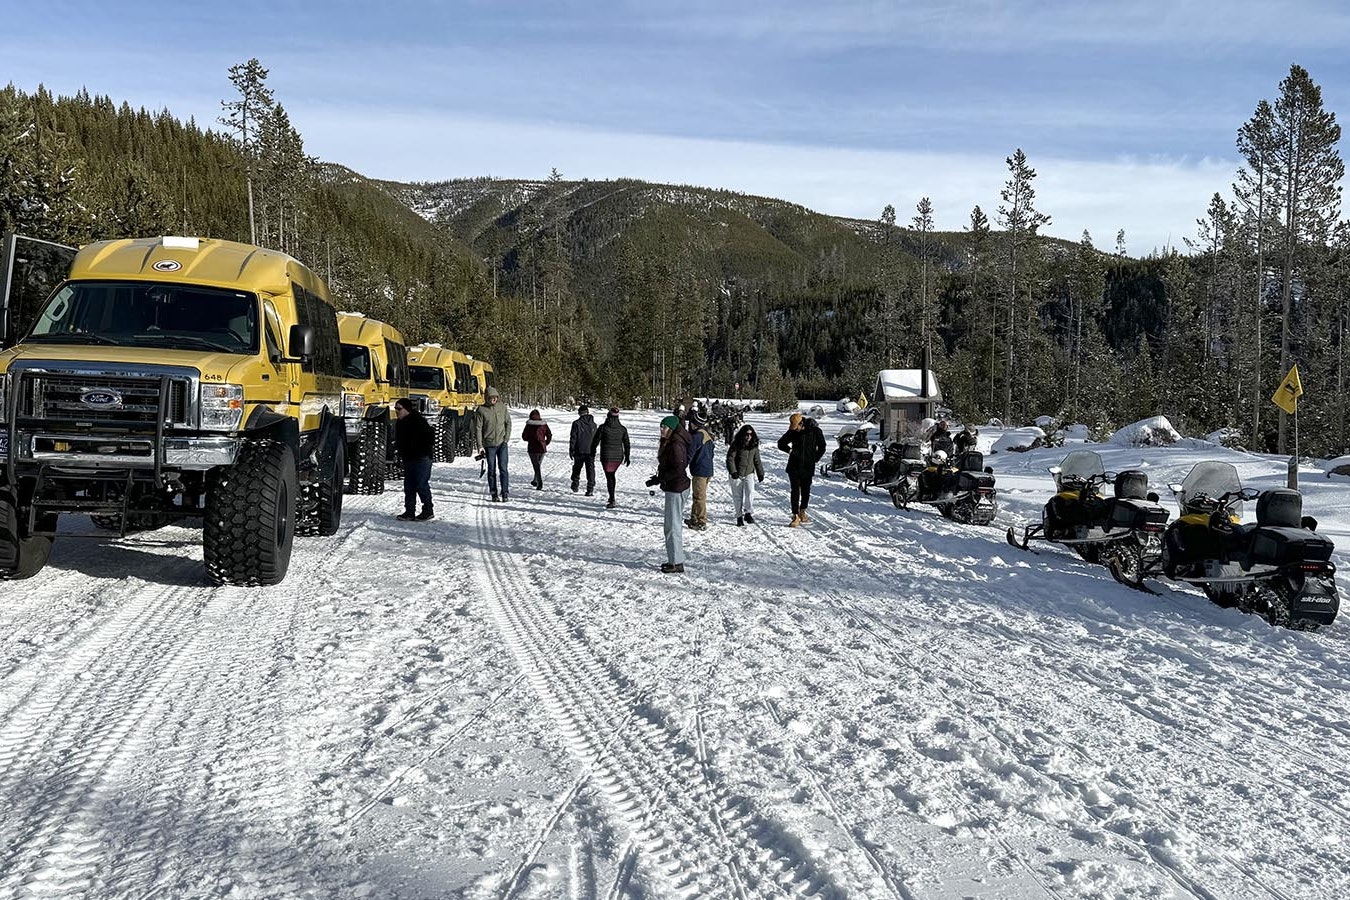 Snow vehicles taking a brief respite at the Gibbon Falls parking lot during a winter tour of Yellowstone National Park.